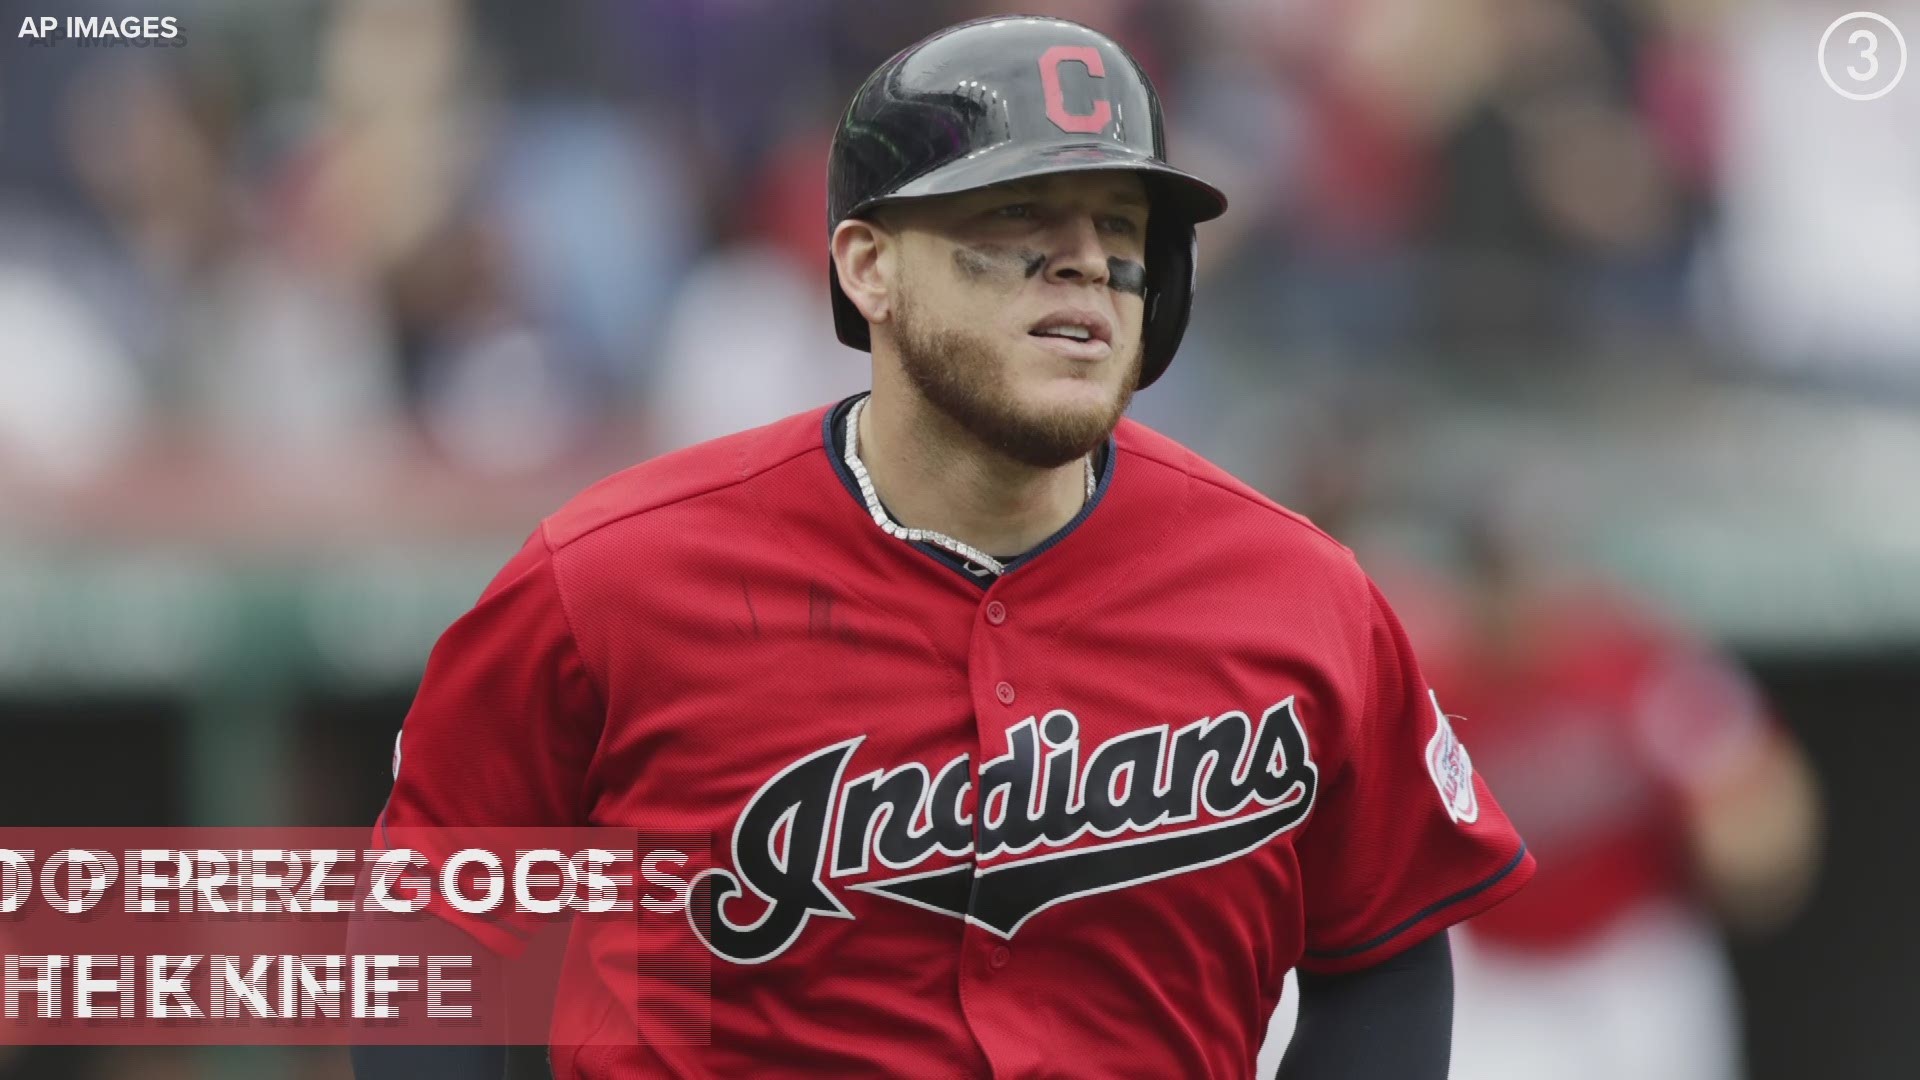 The Indians announced on Thursday that catcher Roberto Perez underwent ankle surgery to remove bone spurs in his ankle.  Perez will be ready for Spring Training.